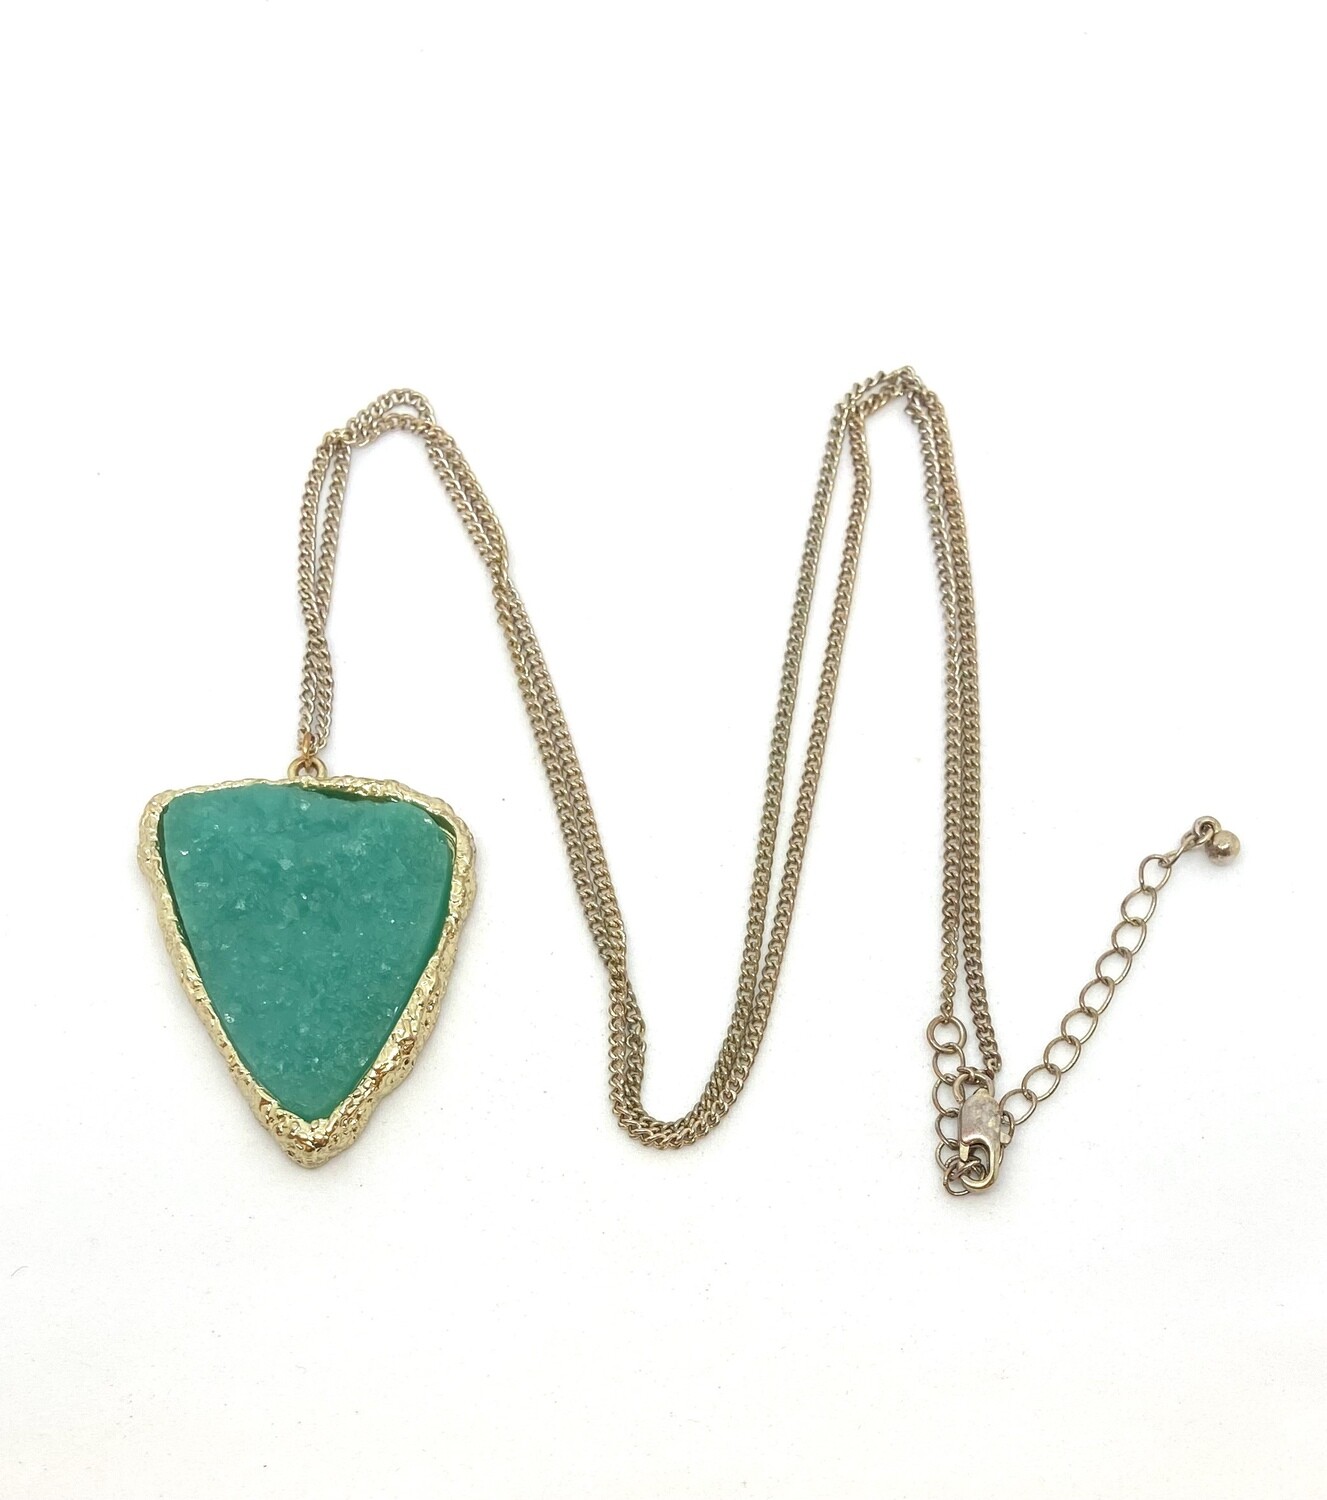 Handmade Teal Druzy Triangle Pendant Gold Necklace